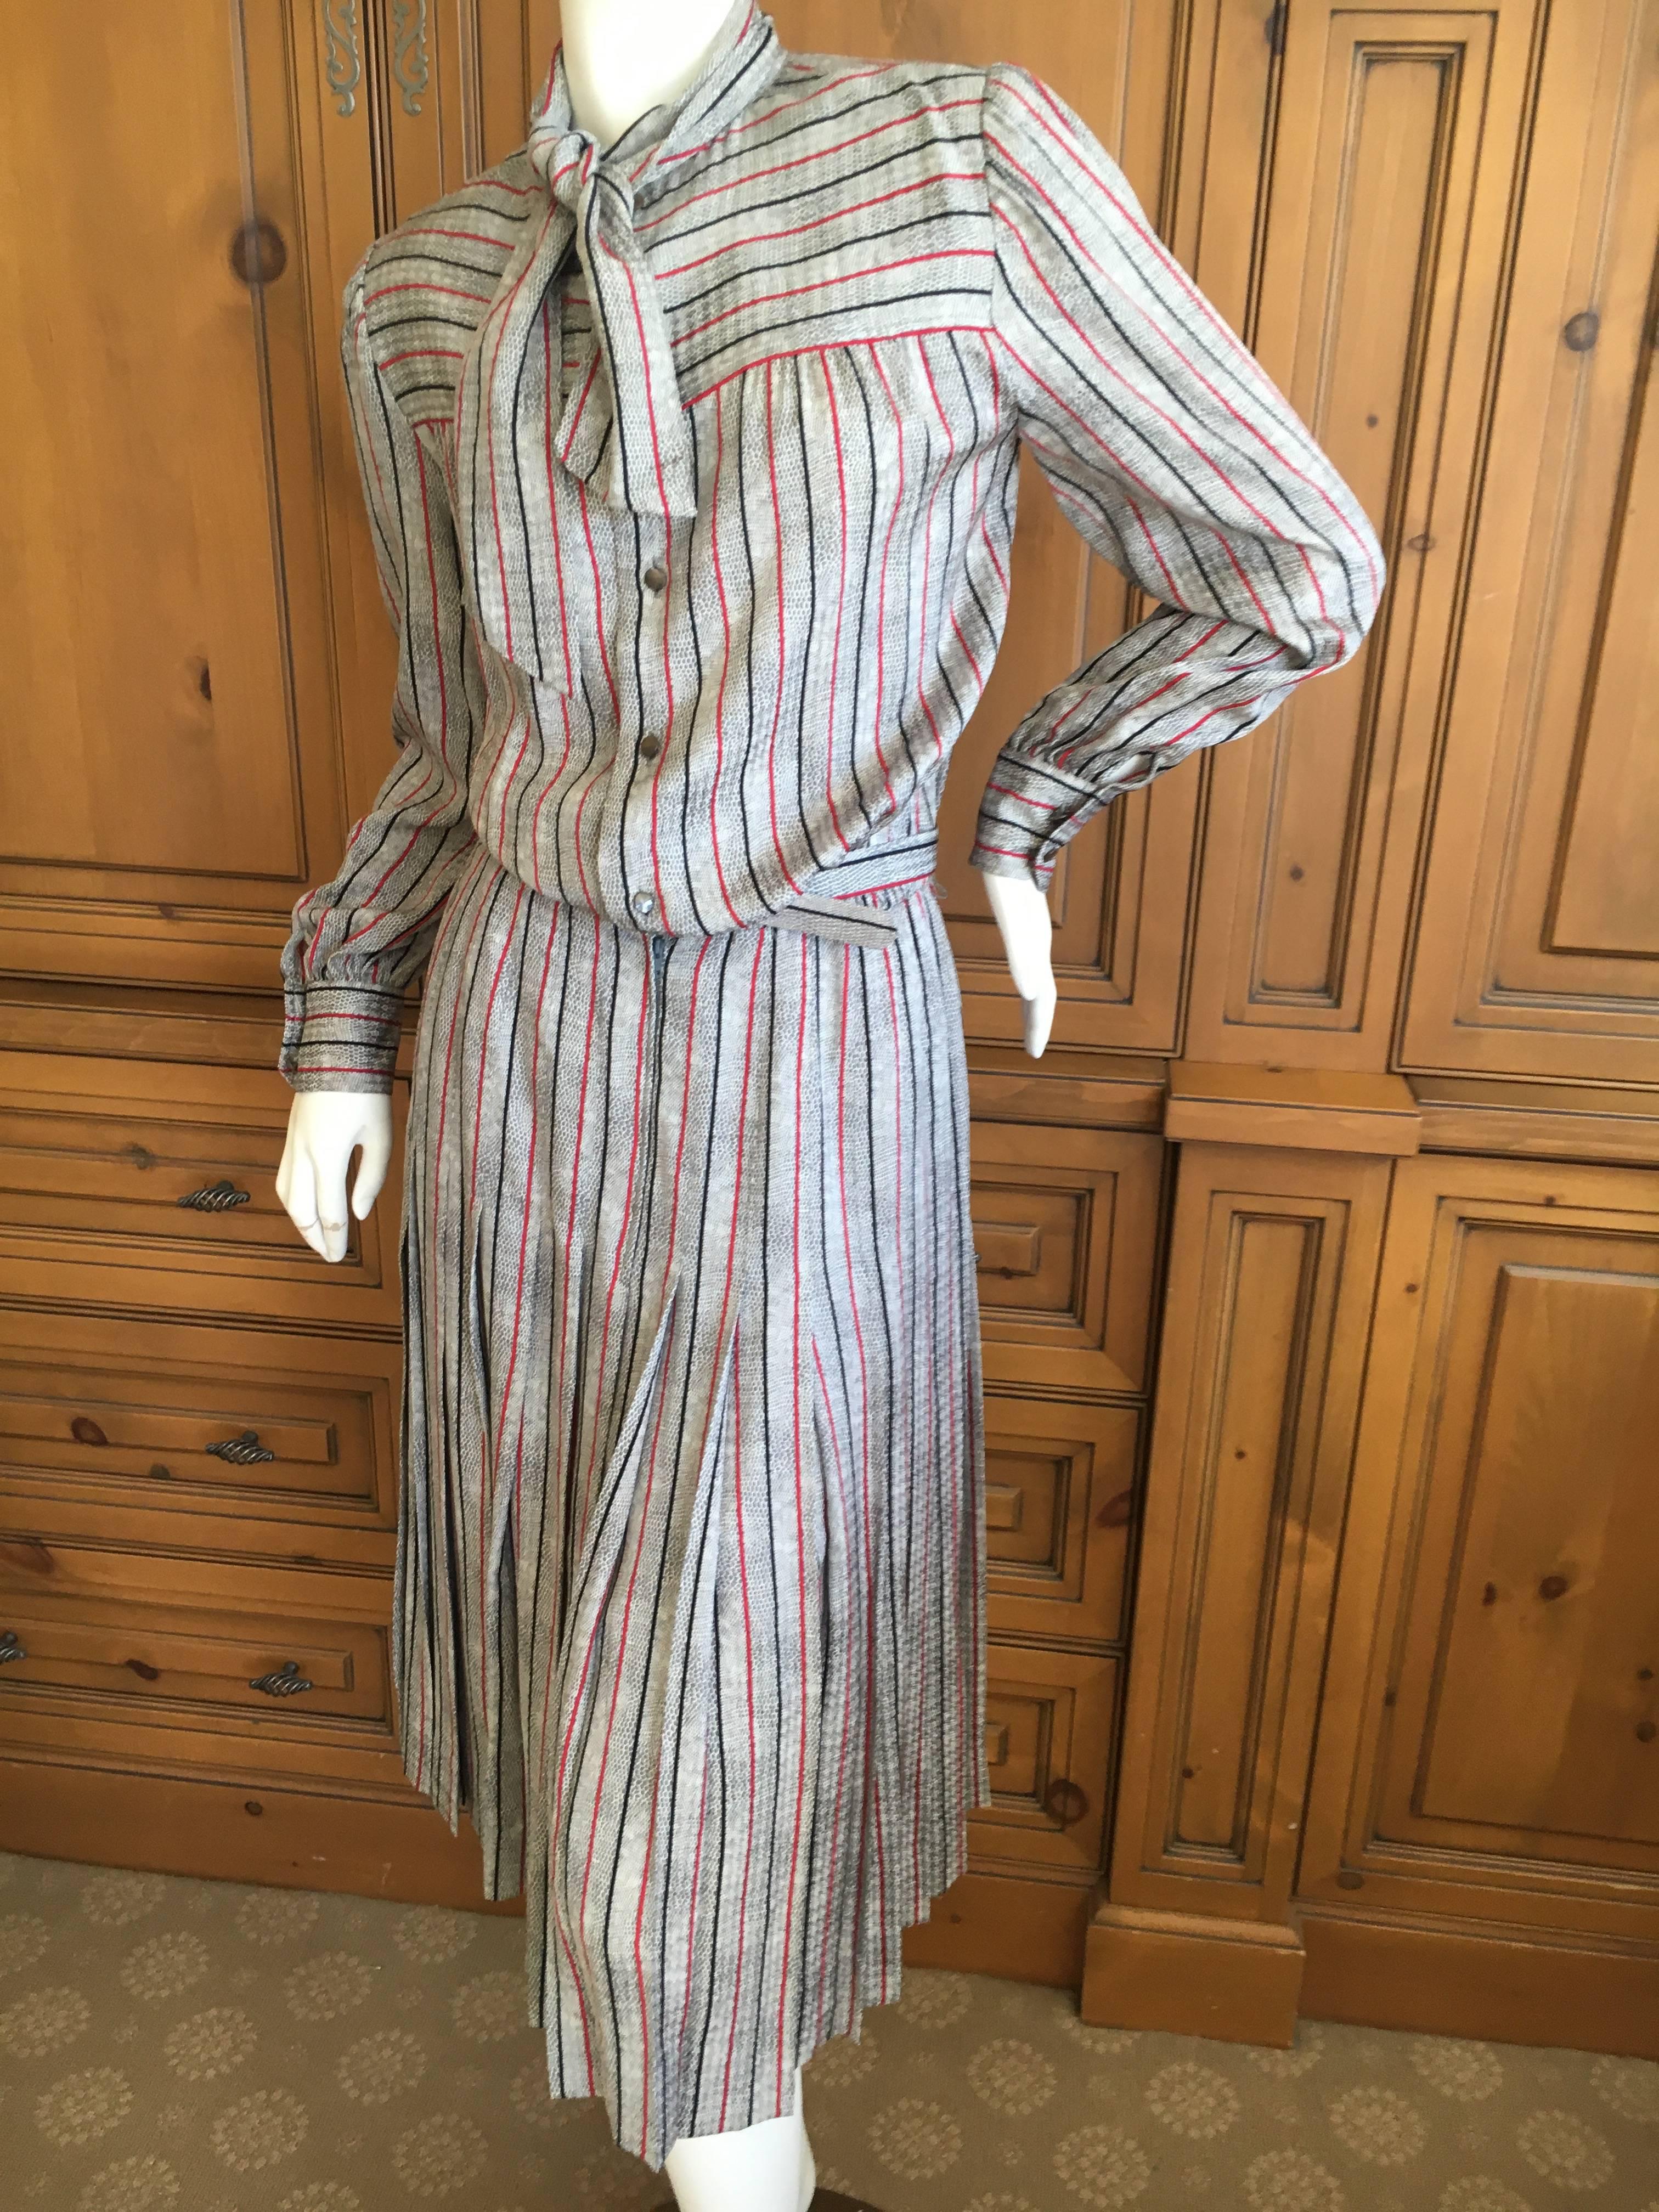 Delightful silk belted day dress in a very pretty stripe snake pattern.
Skirt is pleated, belt is leather lined.
The quality is superb, they just don't make them like this anymore.
Size 40
Bust 40"
Waist 28"
Hips 42"
Length